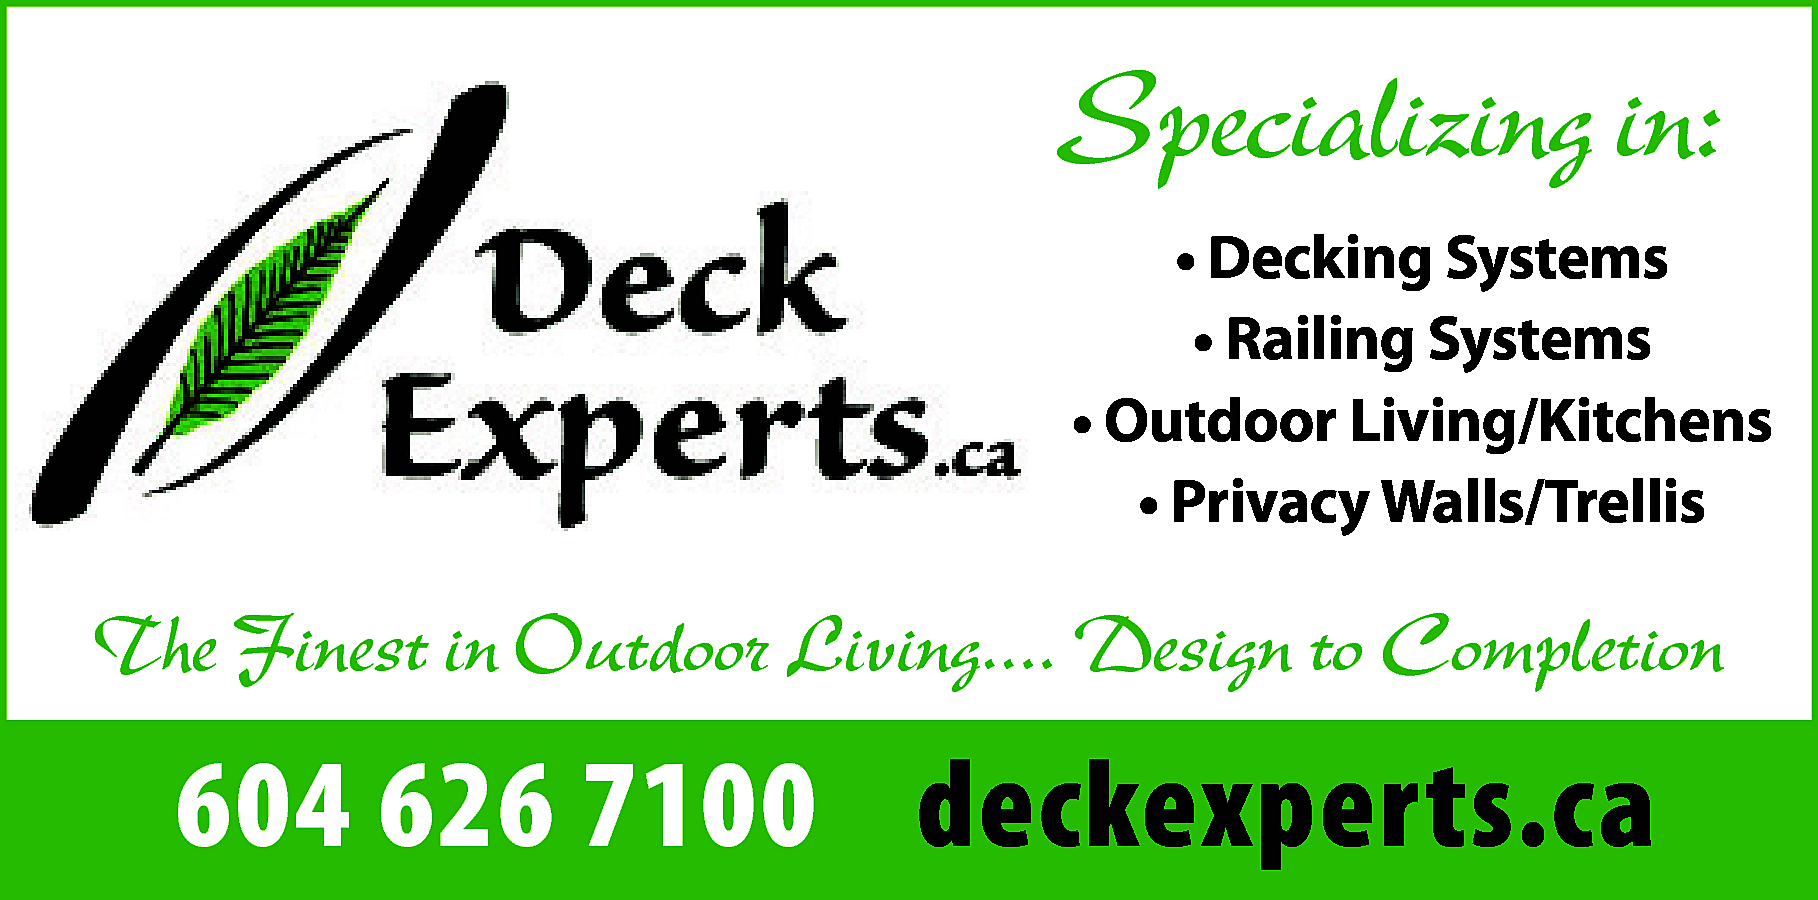 Specializing in: <br>• Decking Systems  Specializing in:  • Decking Systems  • Railing Systems  • Outdoor Living/Kitchens  • Privacy Walls/Trellis    The Finest in Outdoor Living.... Design to Completion    604 626 7100 deckexperts.ca    